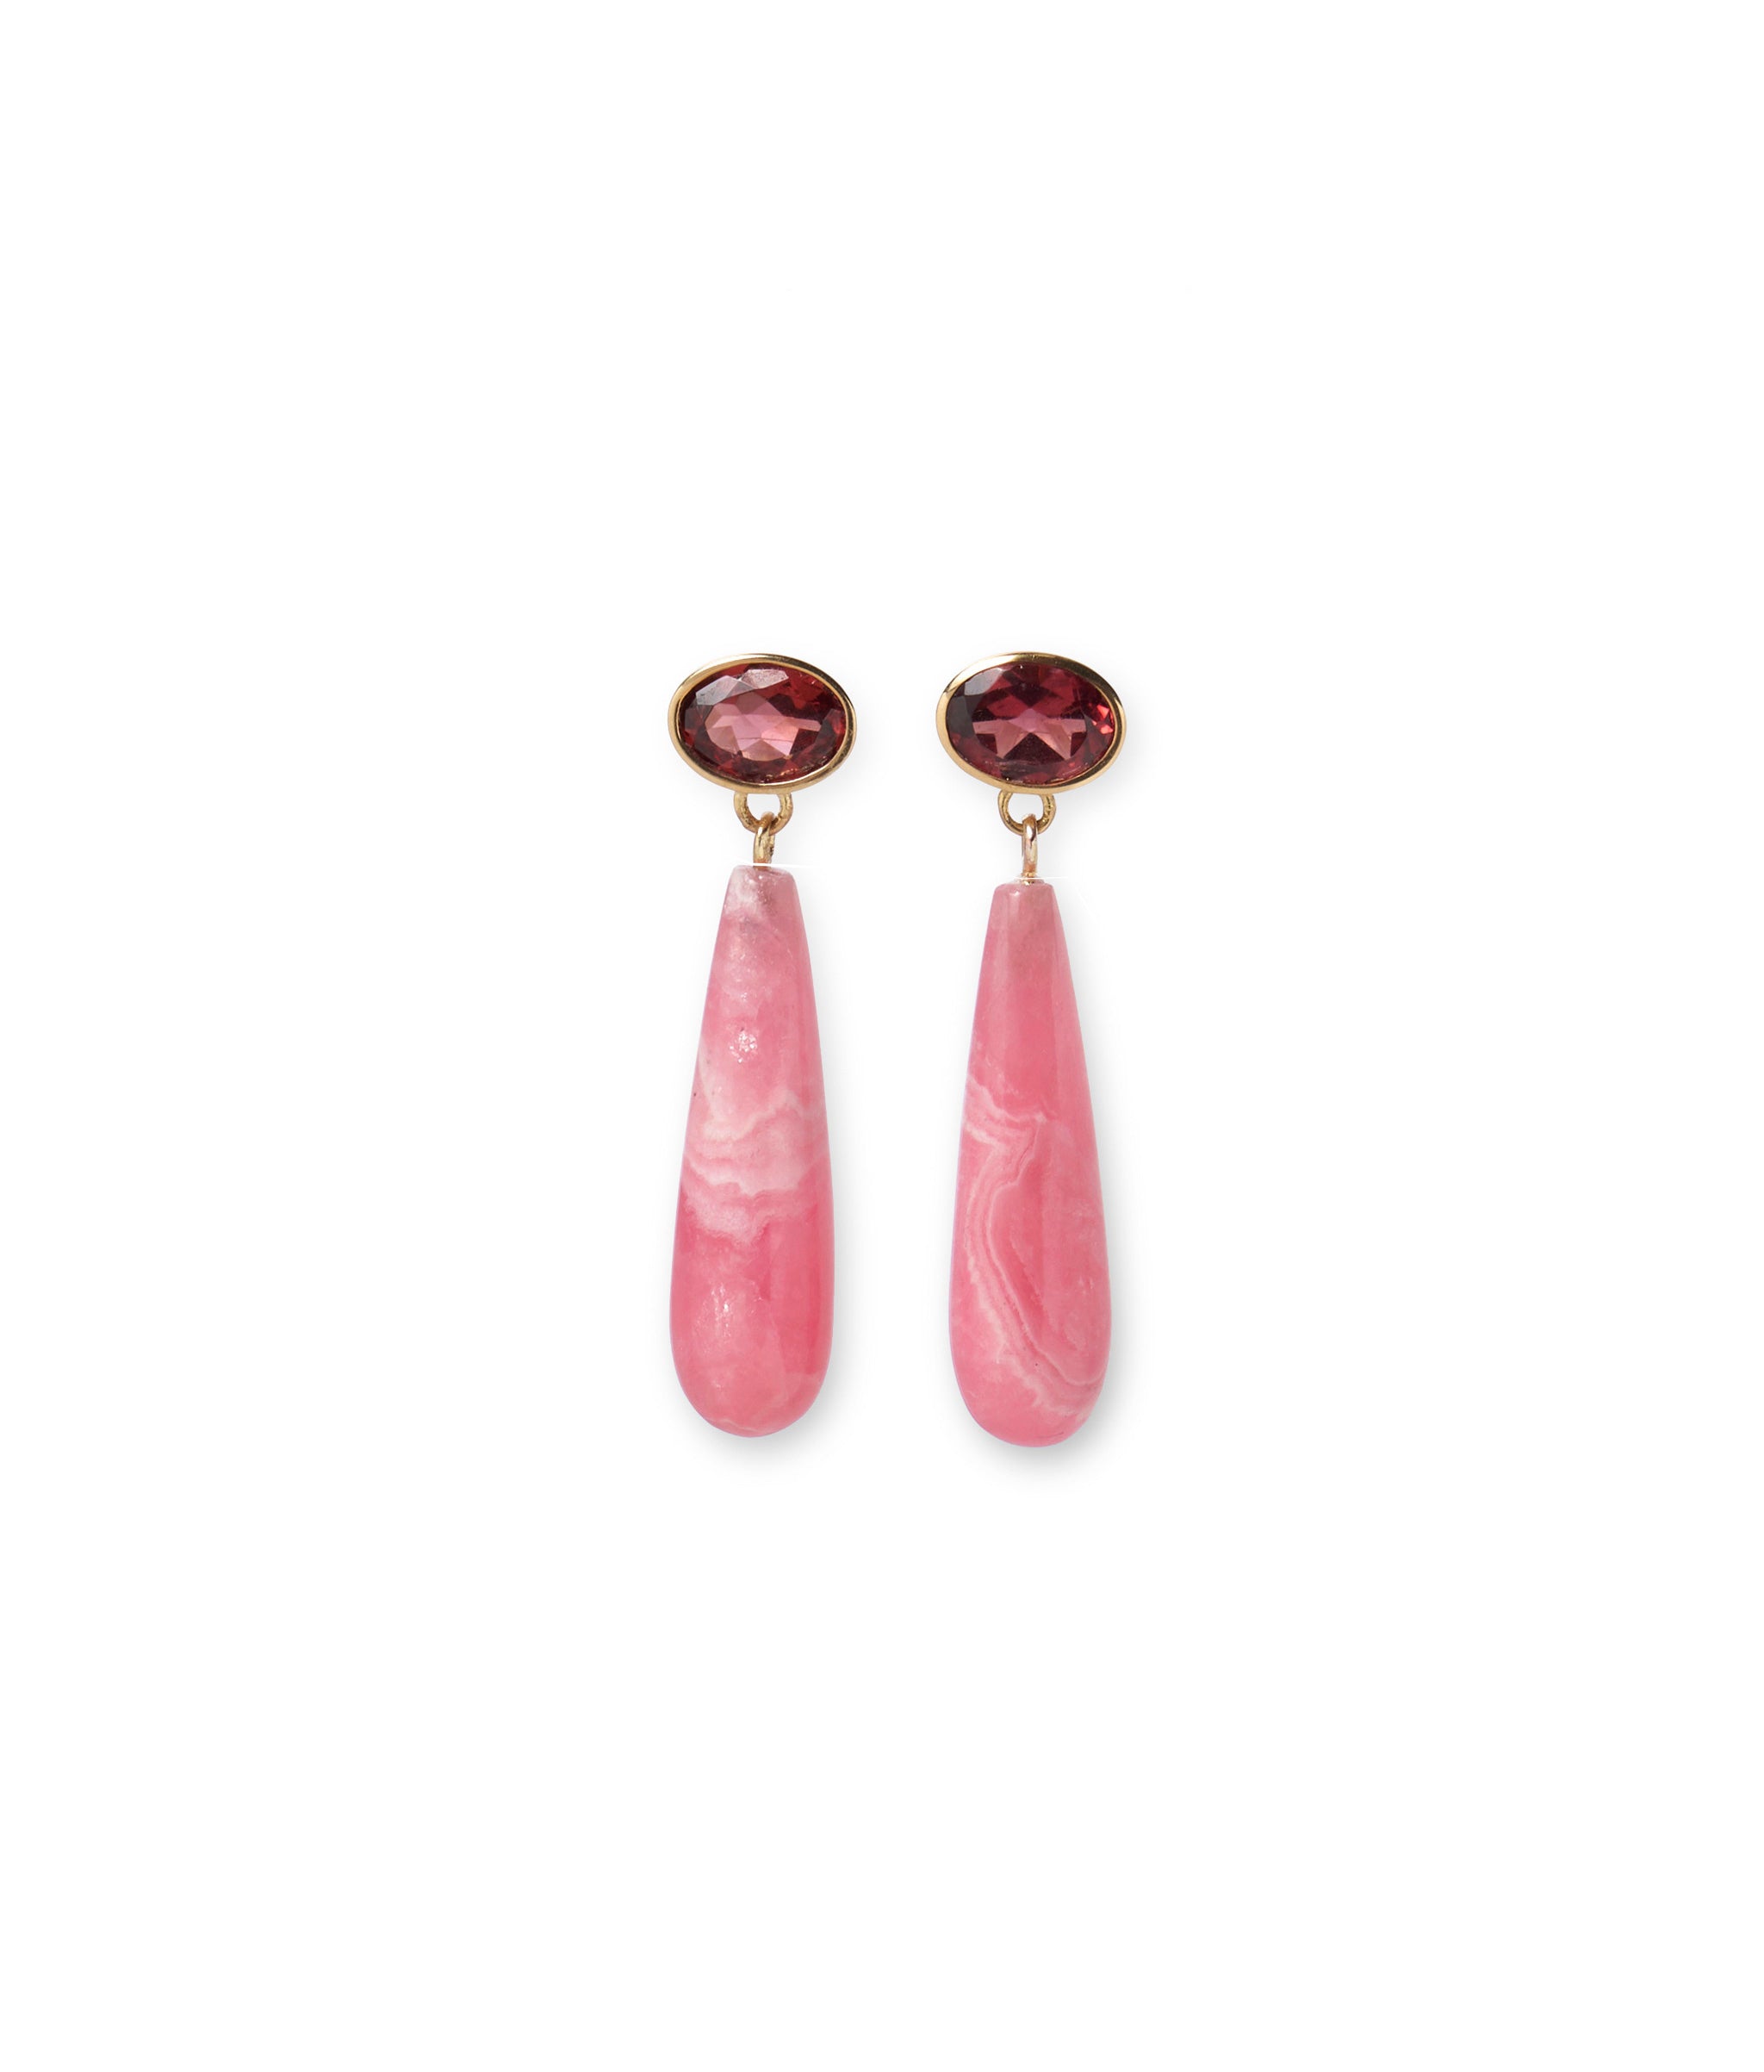 14k gold earrings with faceted semiprecious garnet tops and hanging pink rhodochrosite drops.